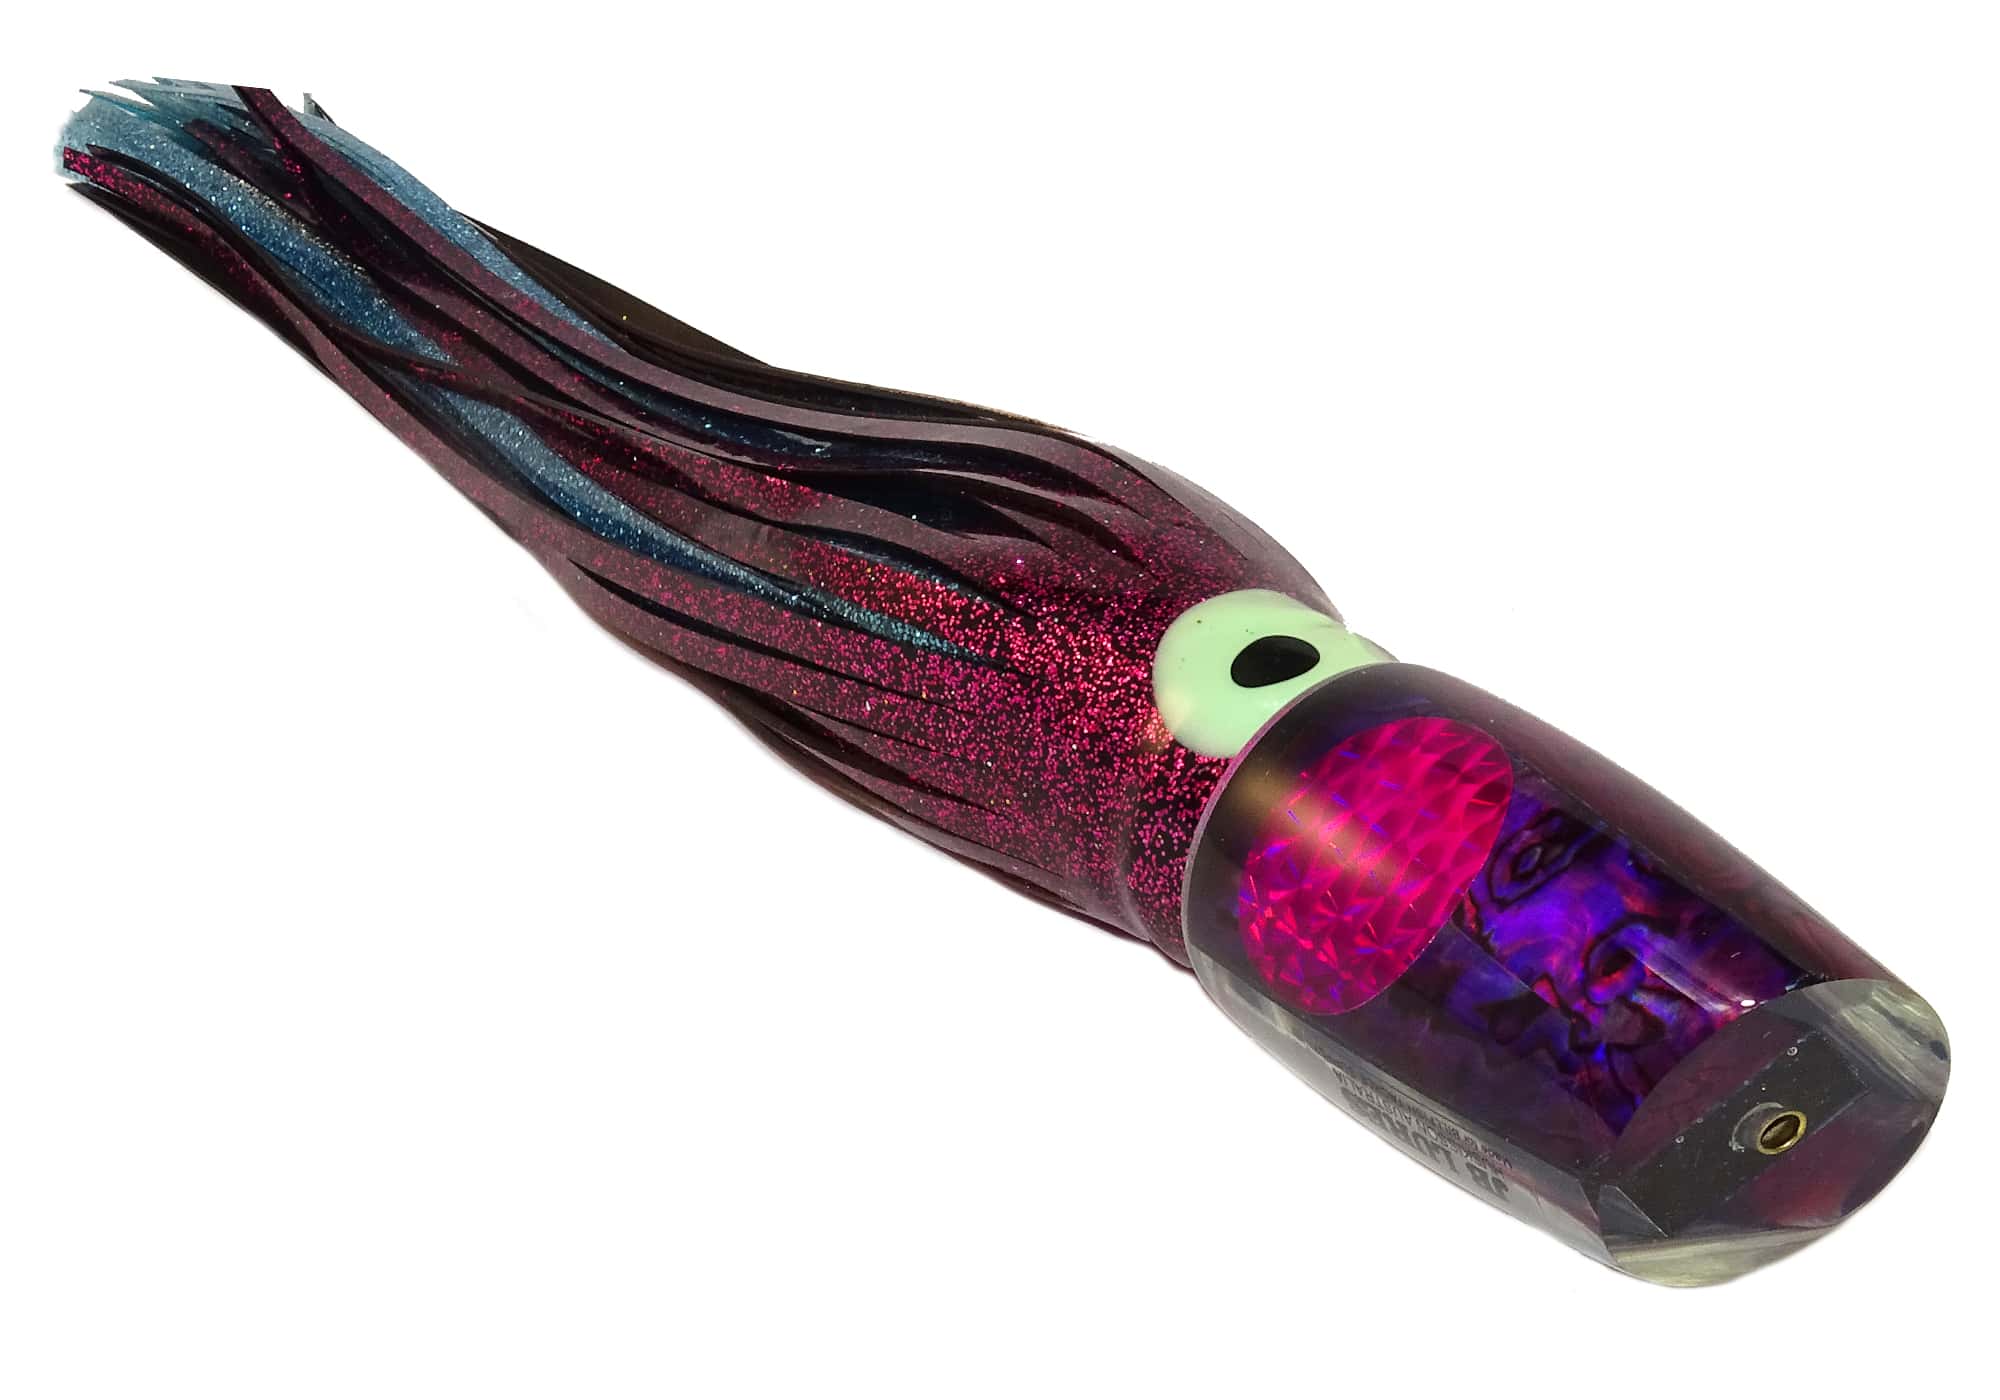 Big Game skirted Trolling Lures - JB Lures - Ripper Series with Yo-Zuri Skirts